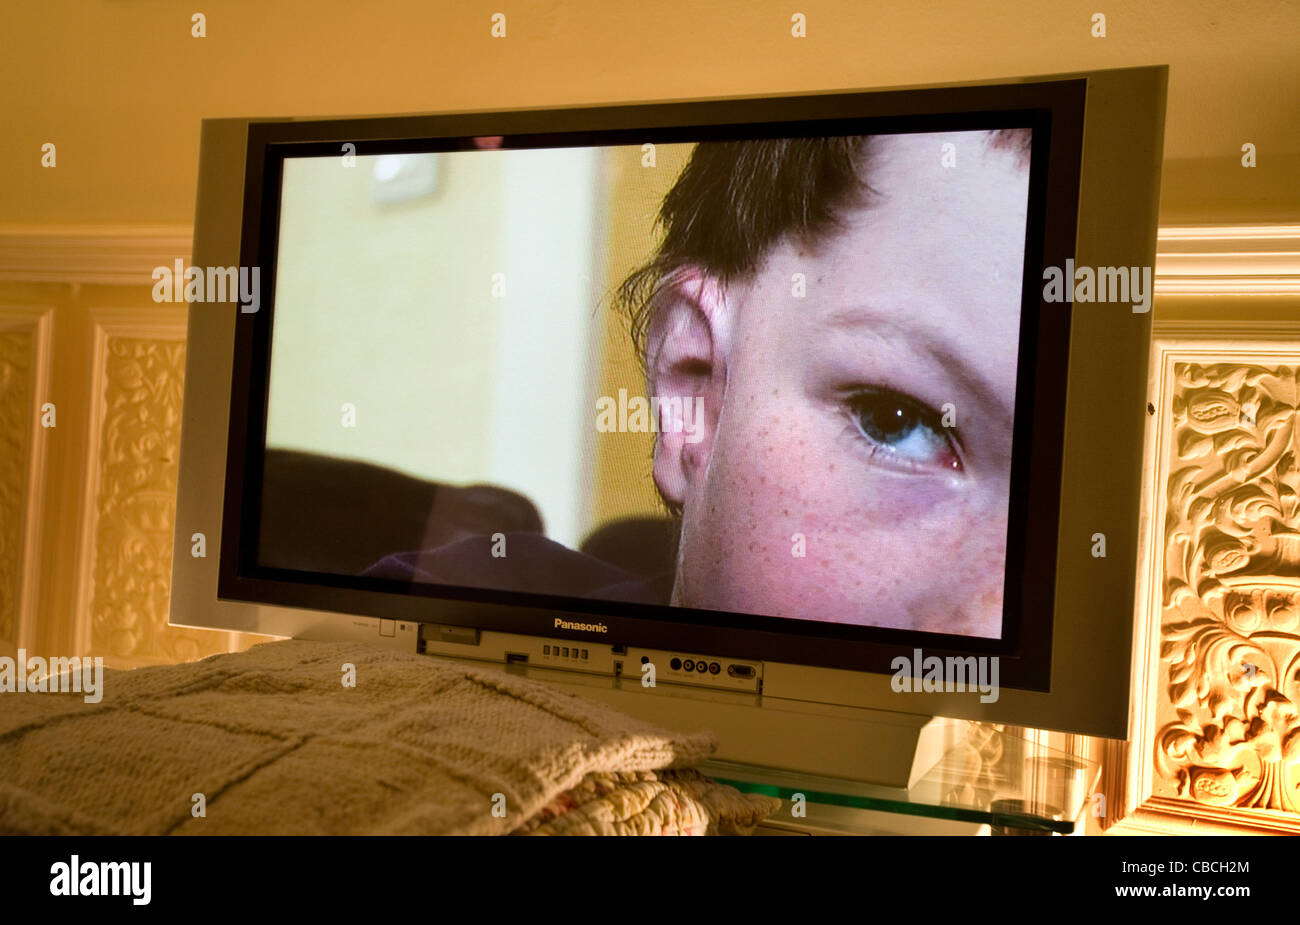 The right eye of a young man peers out from a flat screen television in a domestic lounge. Stock Photo